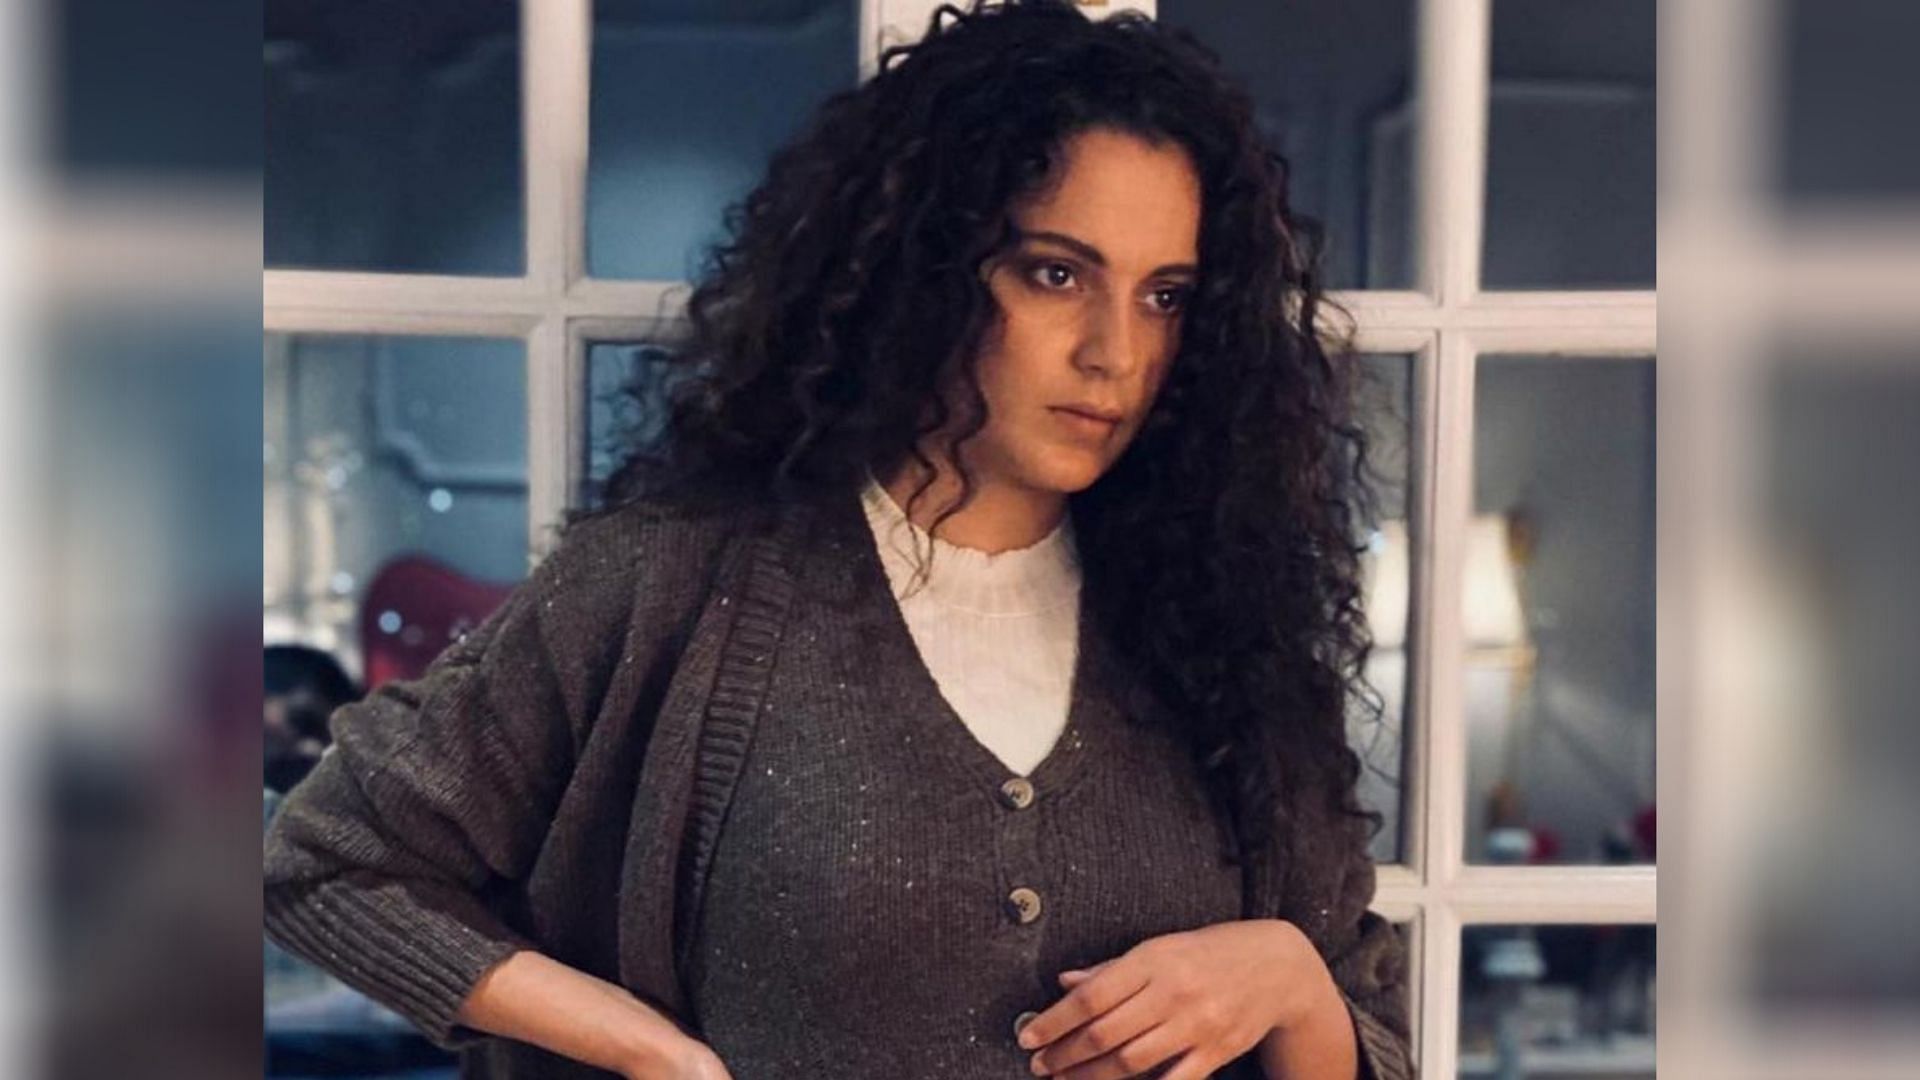 Kangana Ranaut has been sent a legal notice over her tweet on the farmers' protest.